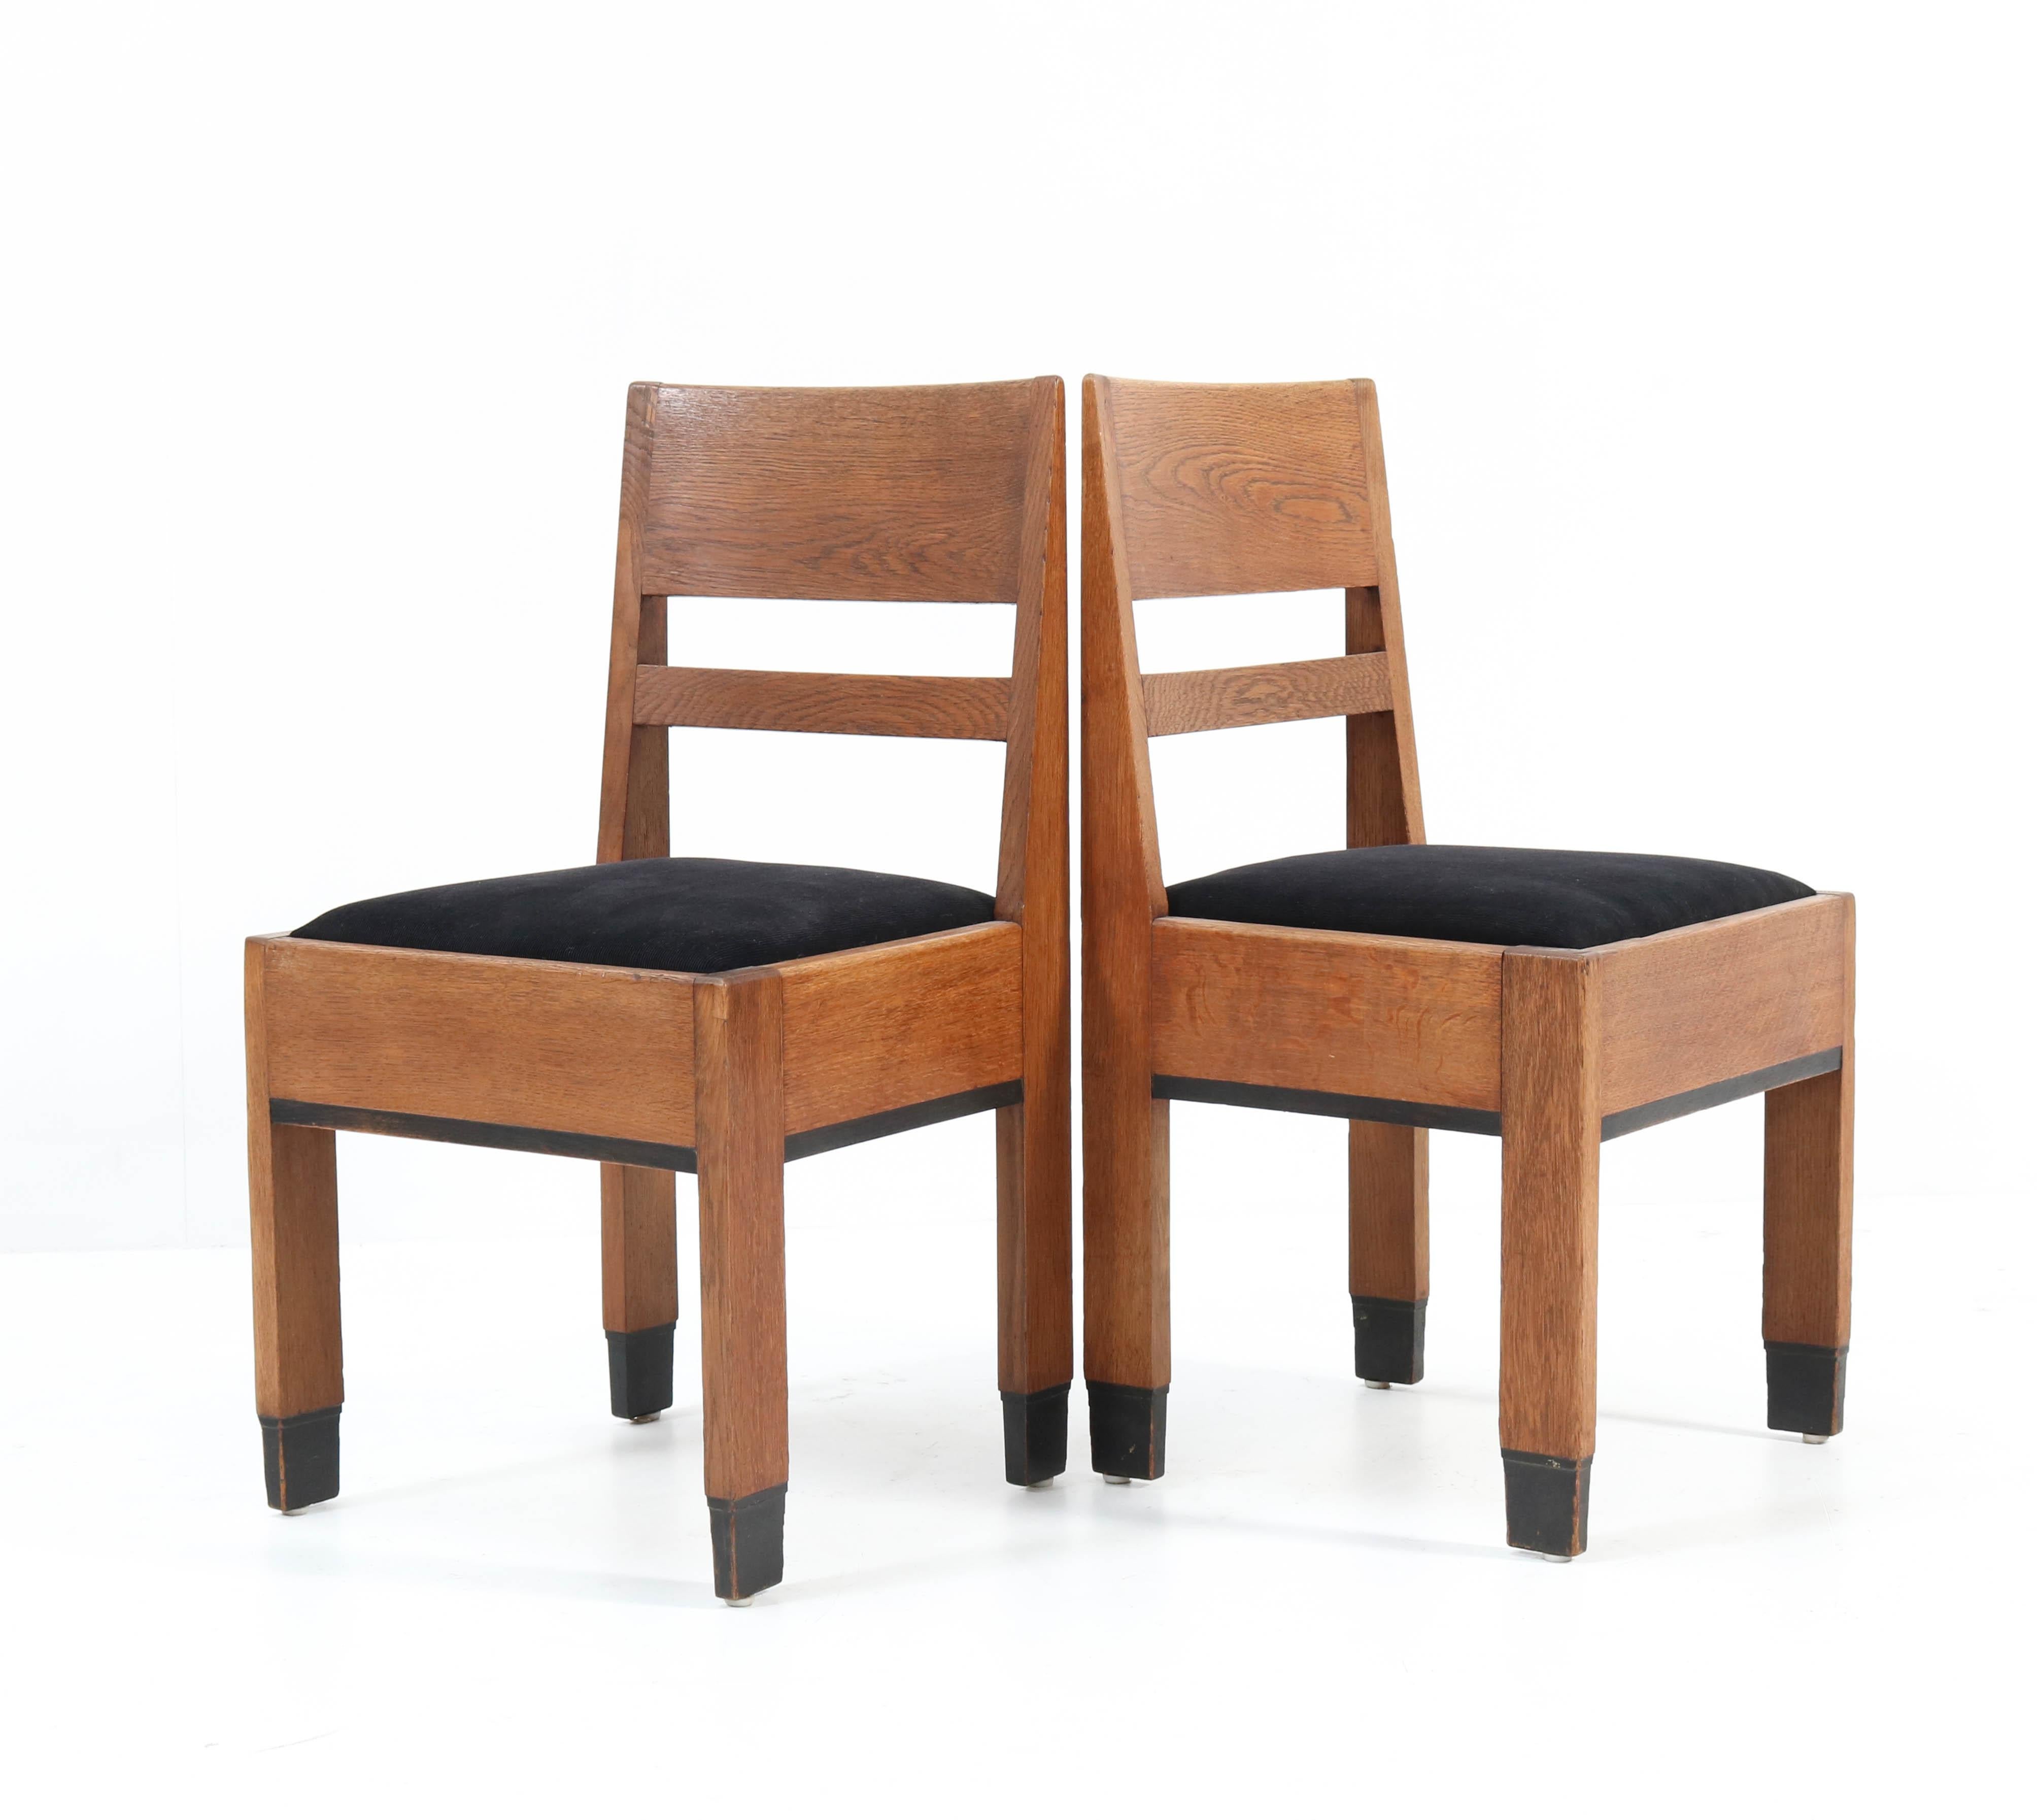 Eight Oak Art Deco Haagse School Chairs by H. Fels for L.O.V. Oosterbeek, 1924 2